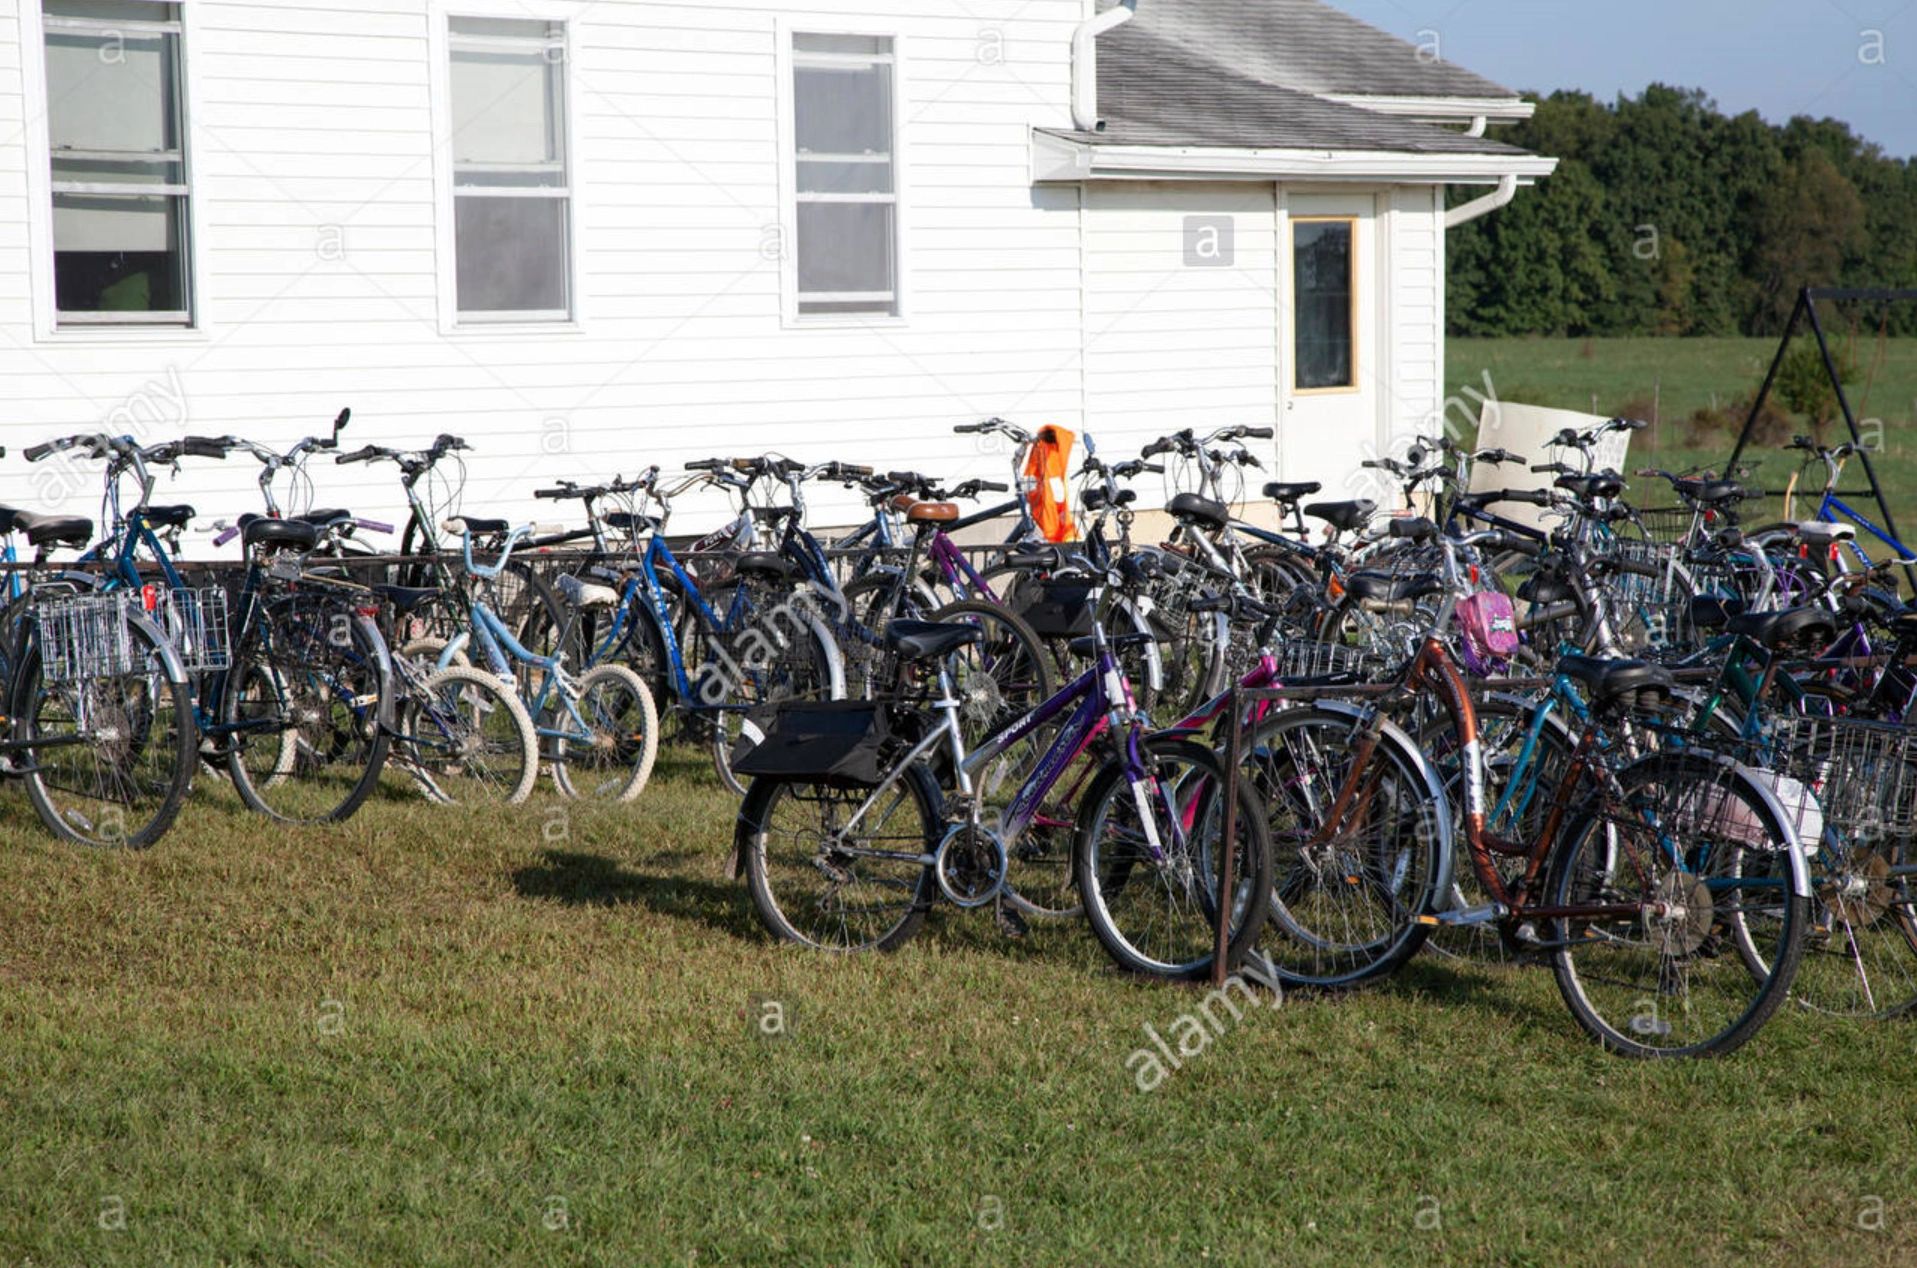 Amish School with parked bicycles Indiana USA